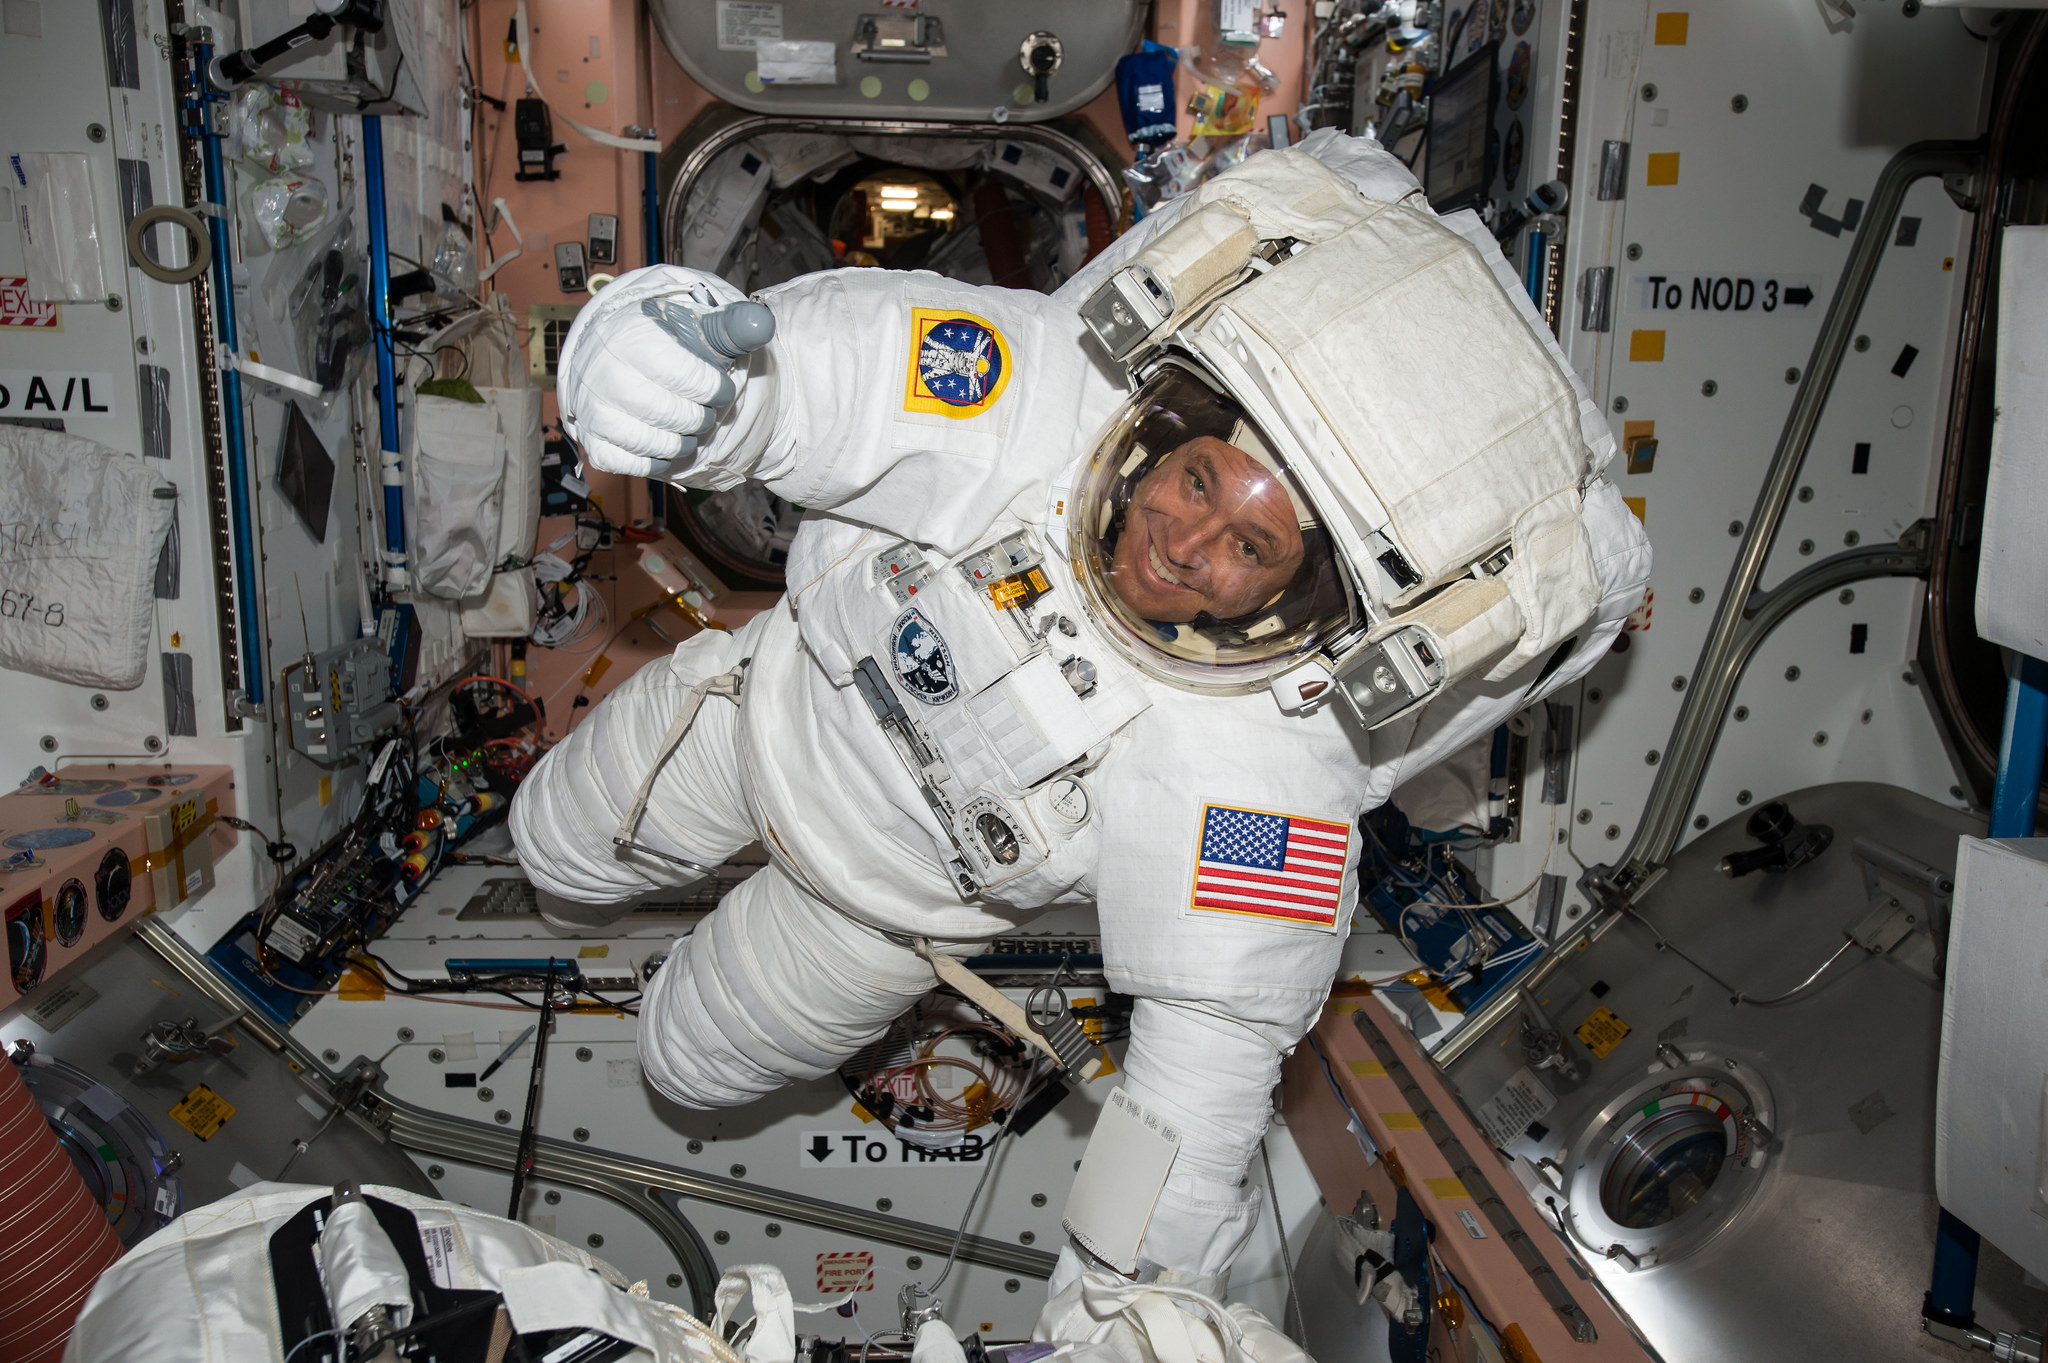 NASA astronaut Jack Fischer gives a thumbs-up sign while wearing an extravehicular mobility unit (EMU) spacesuit ahead of a May 12, 2017 spacewalk at the International Space Station.  Fischer and NASA astronaut Peggy Whitson will conduct a repair spacewalk on Tuesday, May 23.